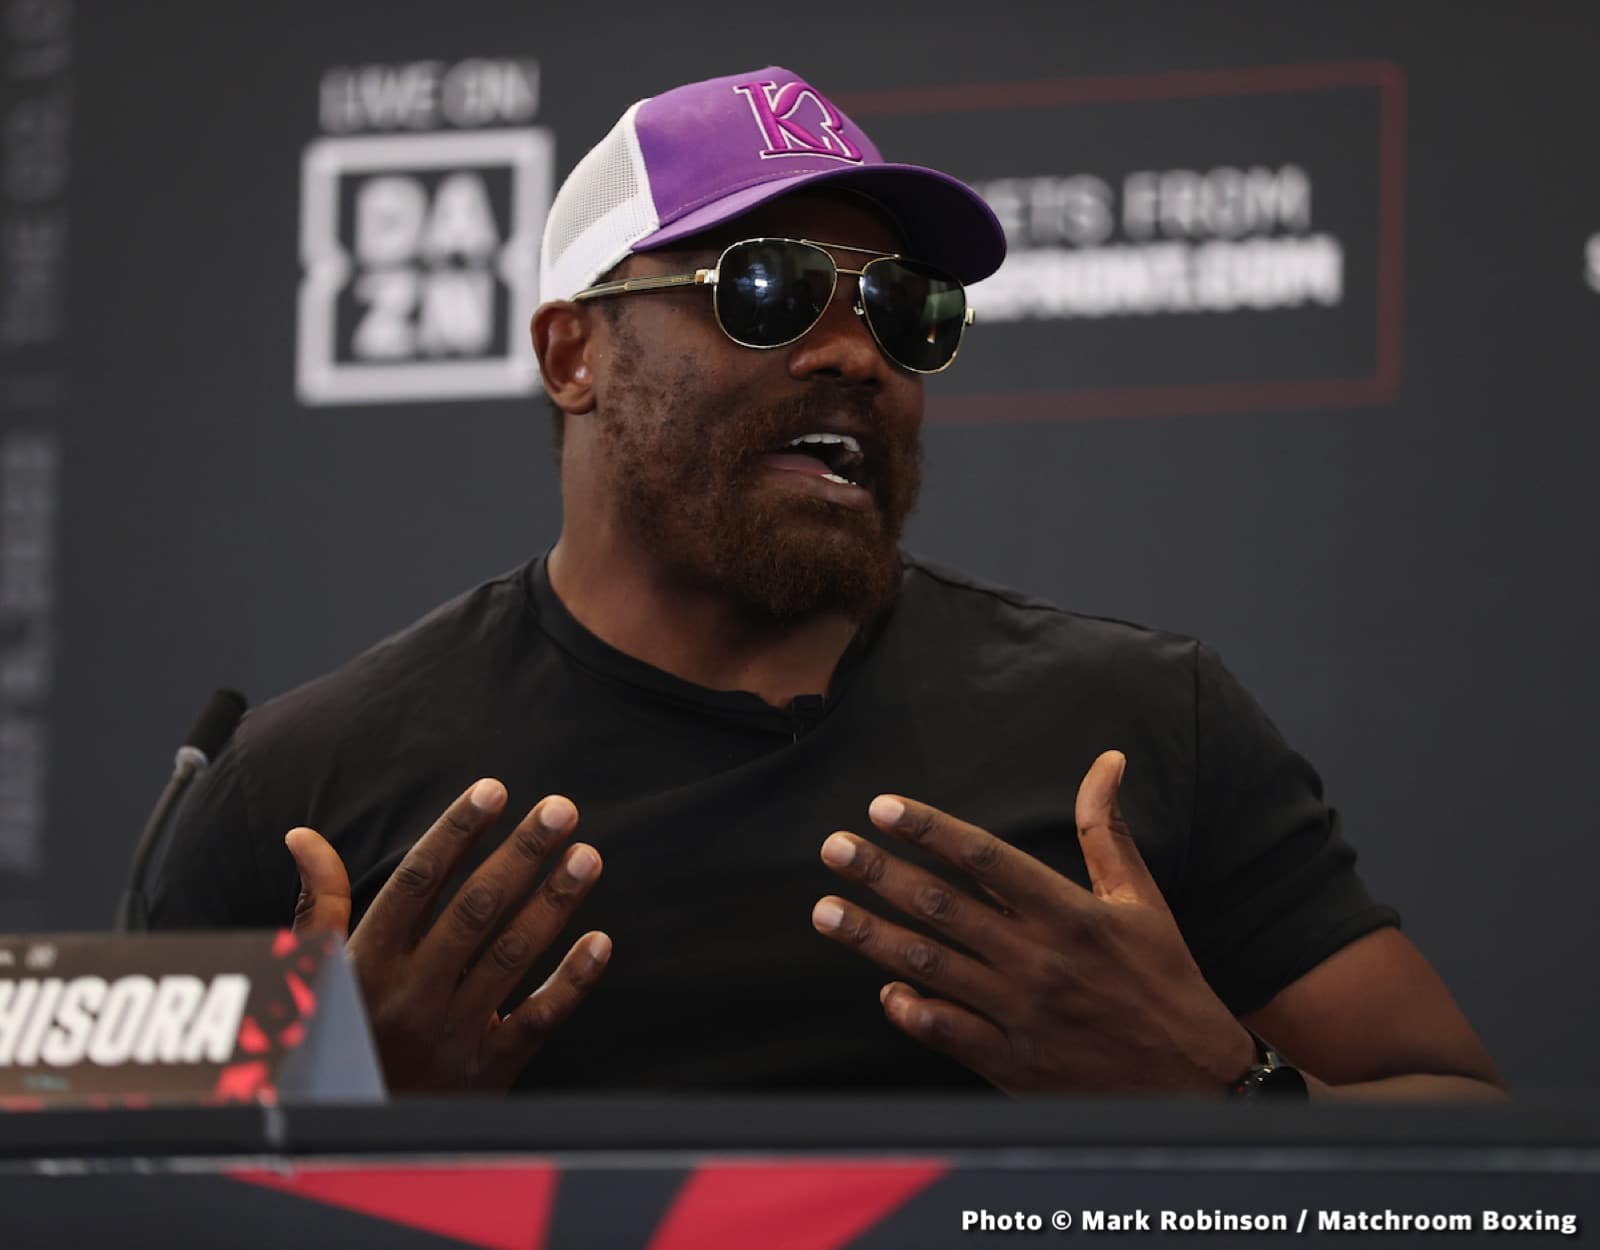 Chisora “Guarantees” He Will KO Pulev; Pulev Asks “How Can You Guarantee A Knockout!”